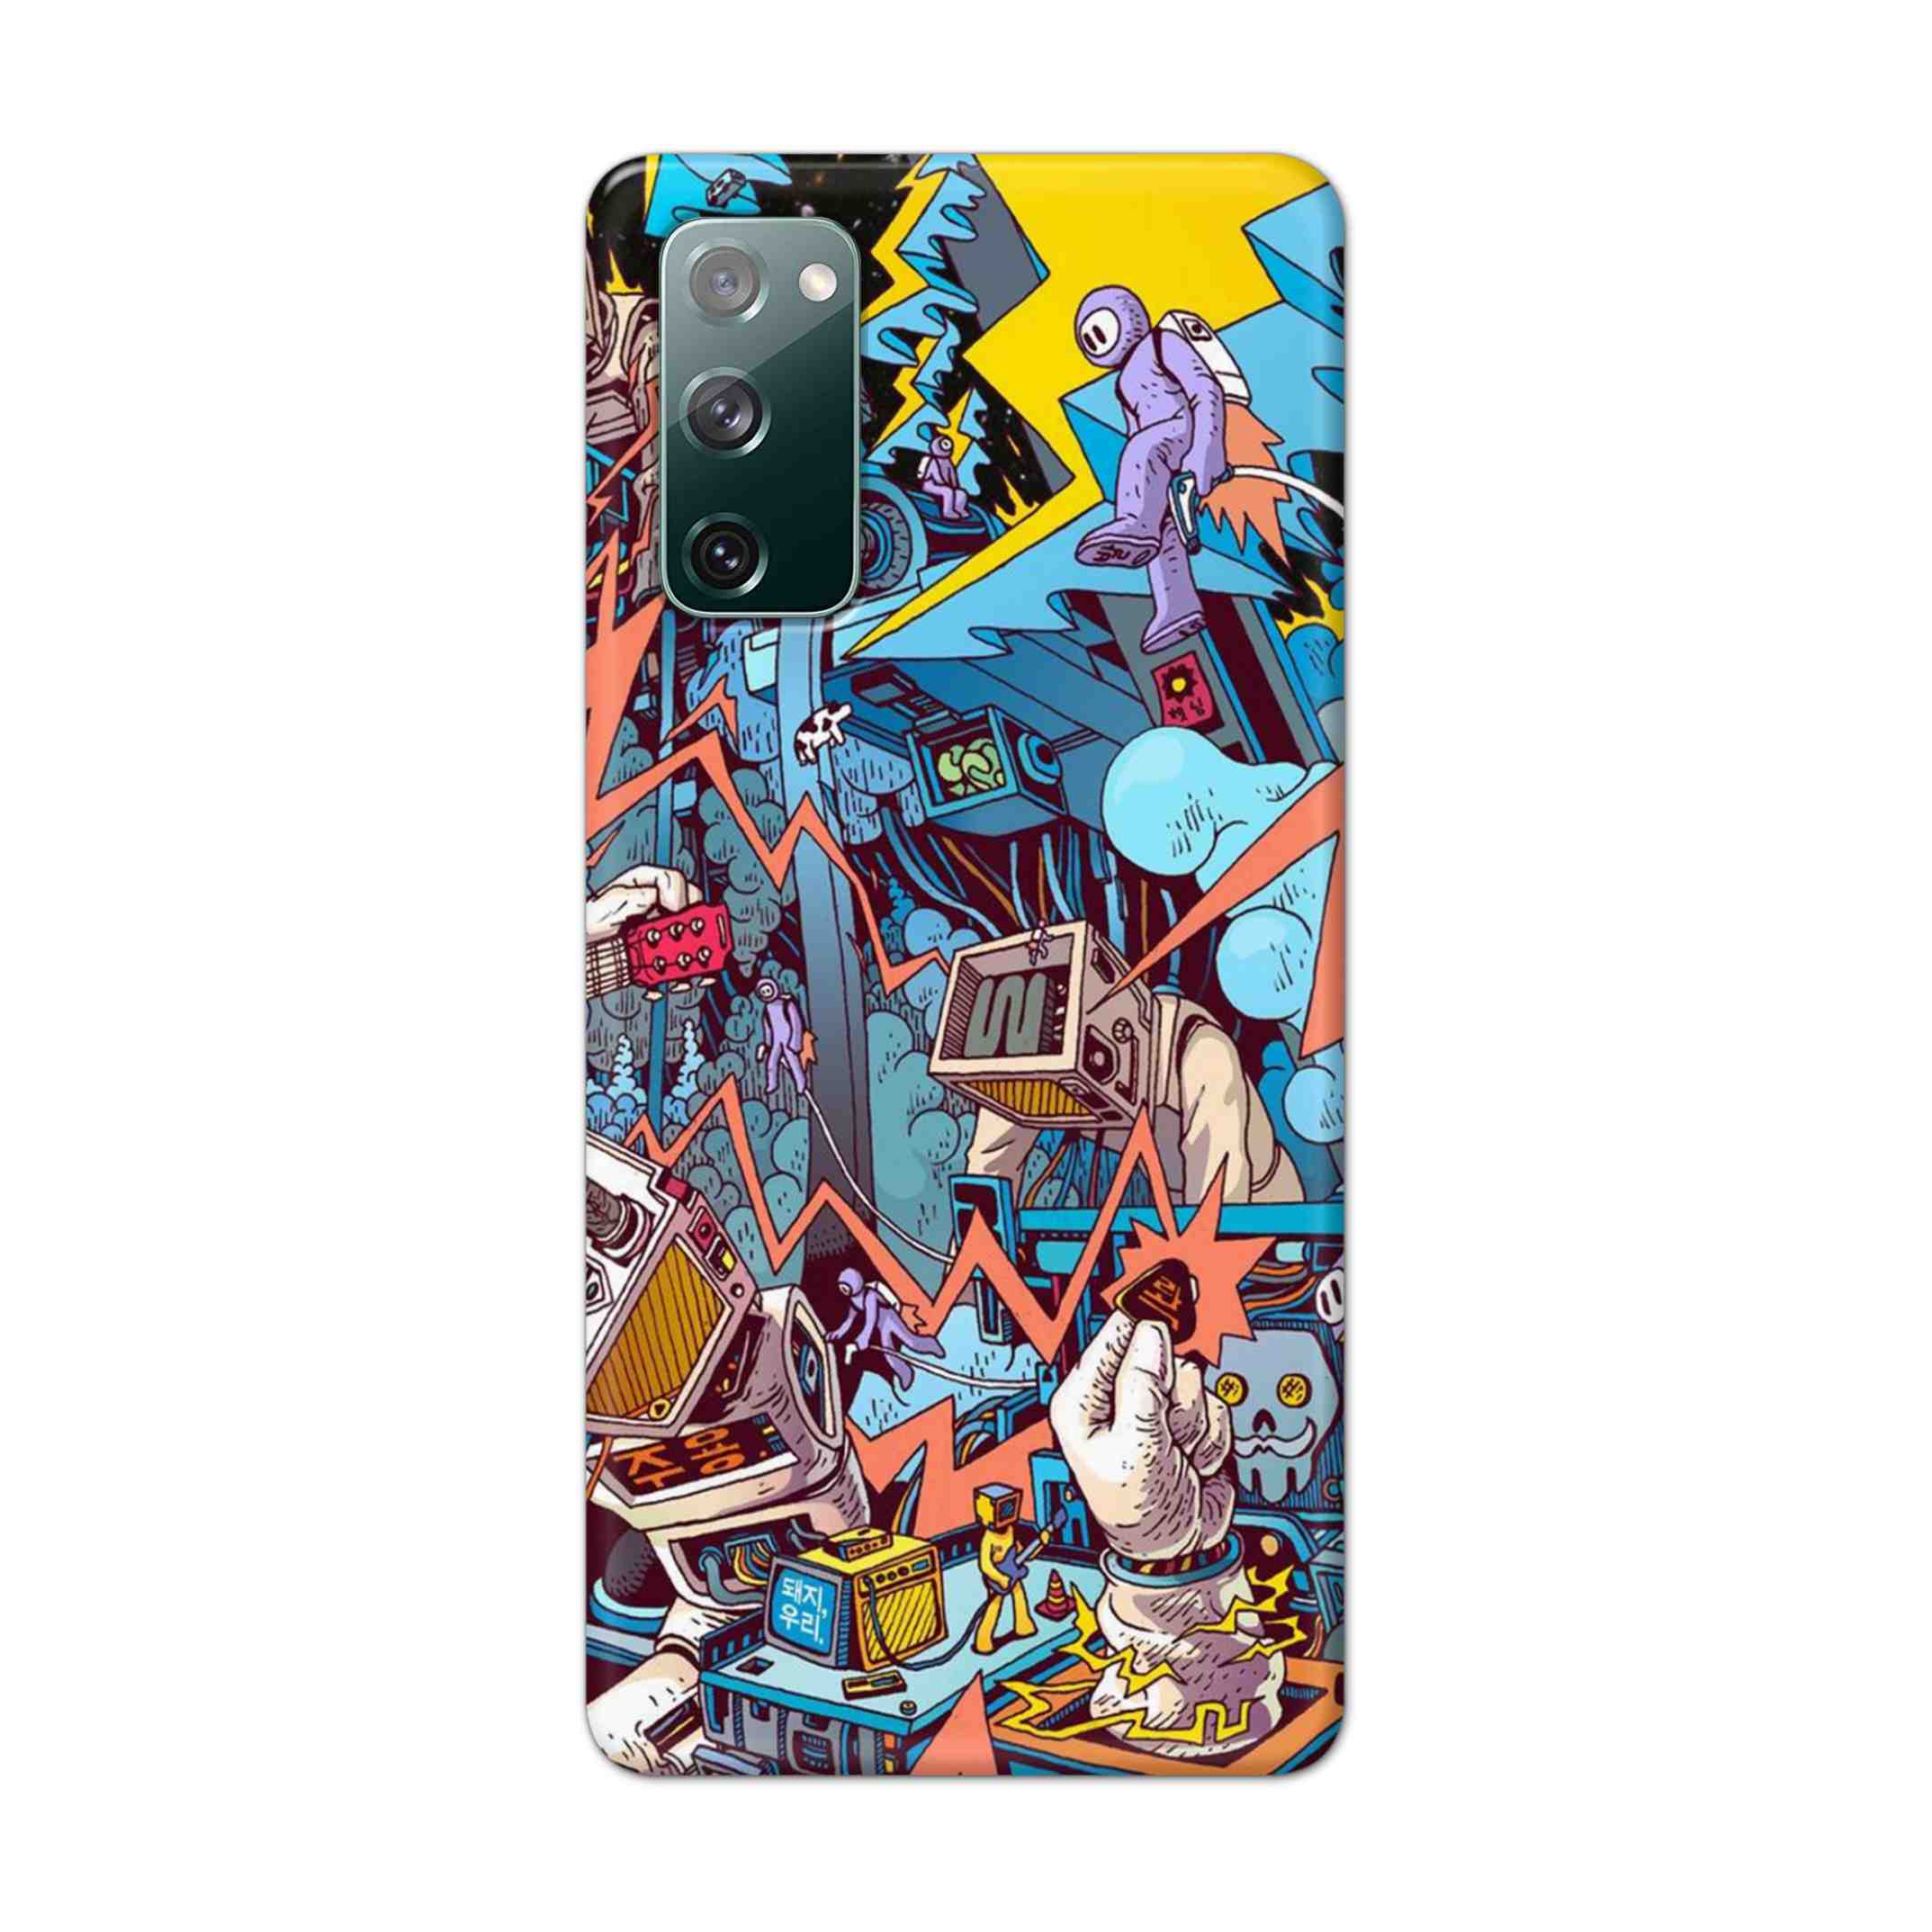 Buy Ofo Panic Hard Back Mobile Phone Case Cover For Samsung Galaxy S20 FE Online